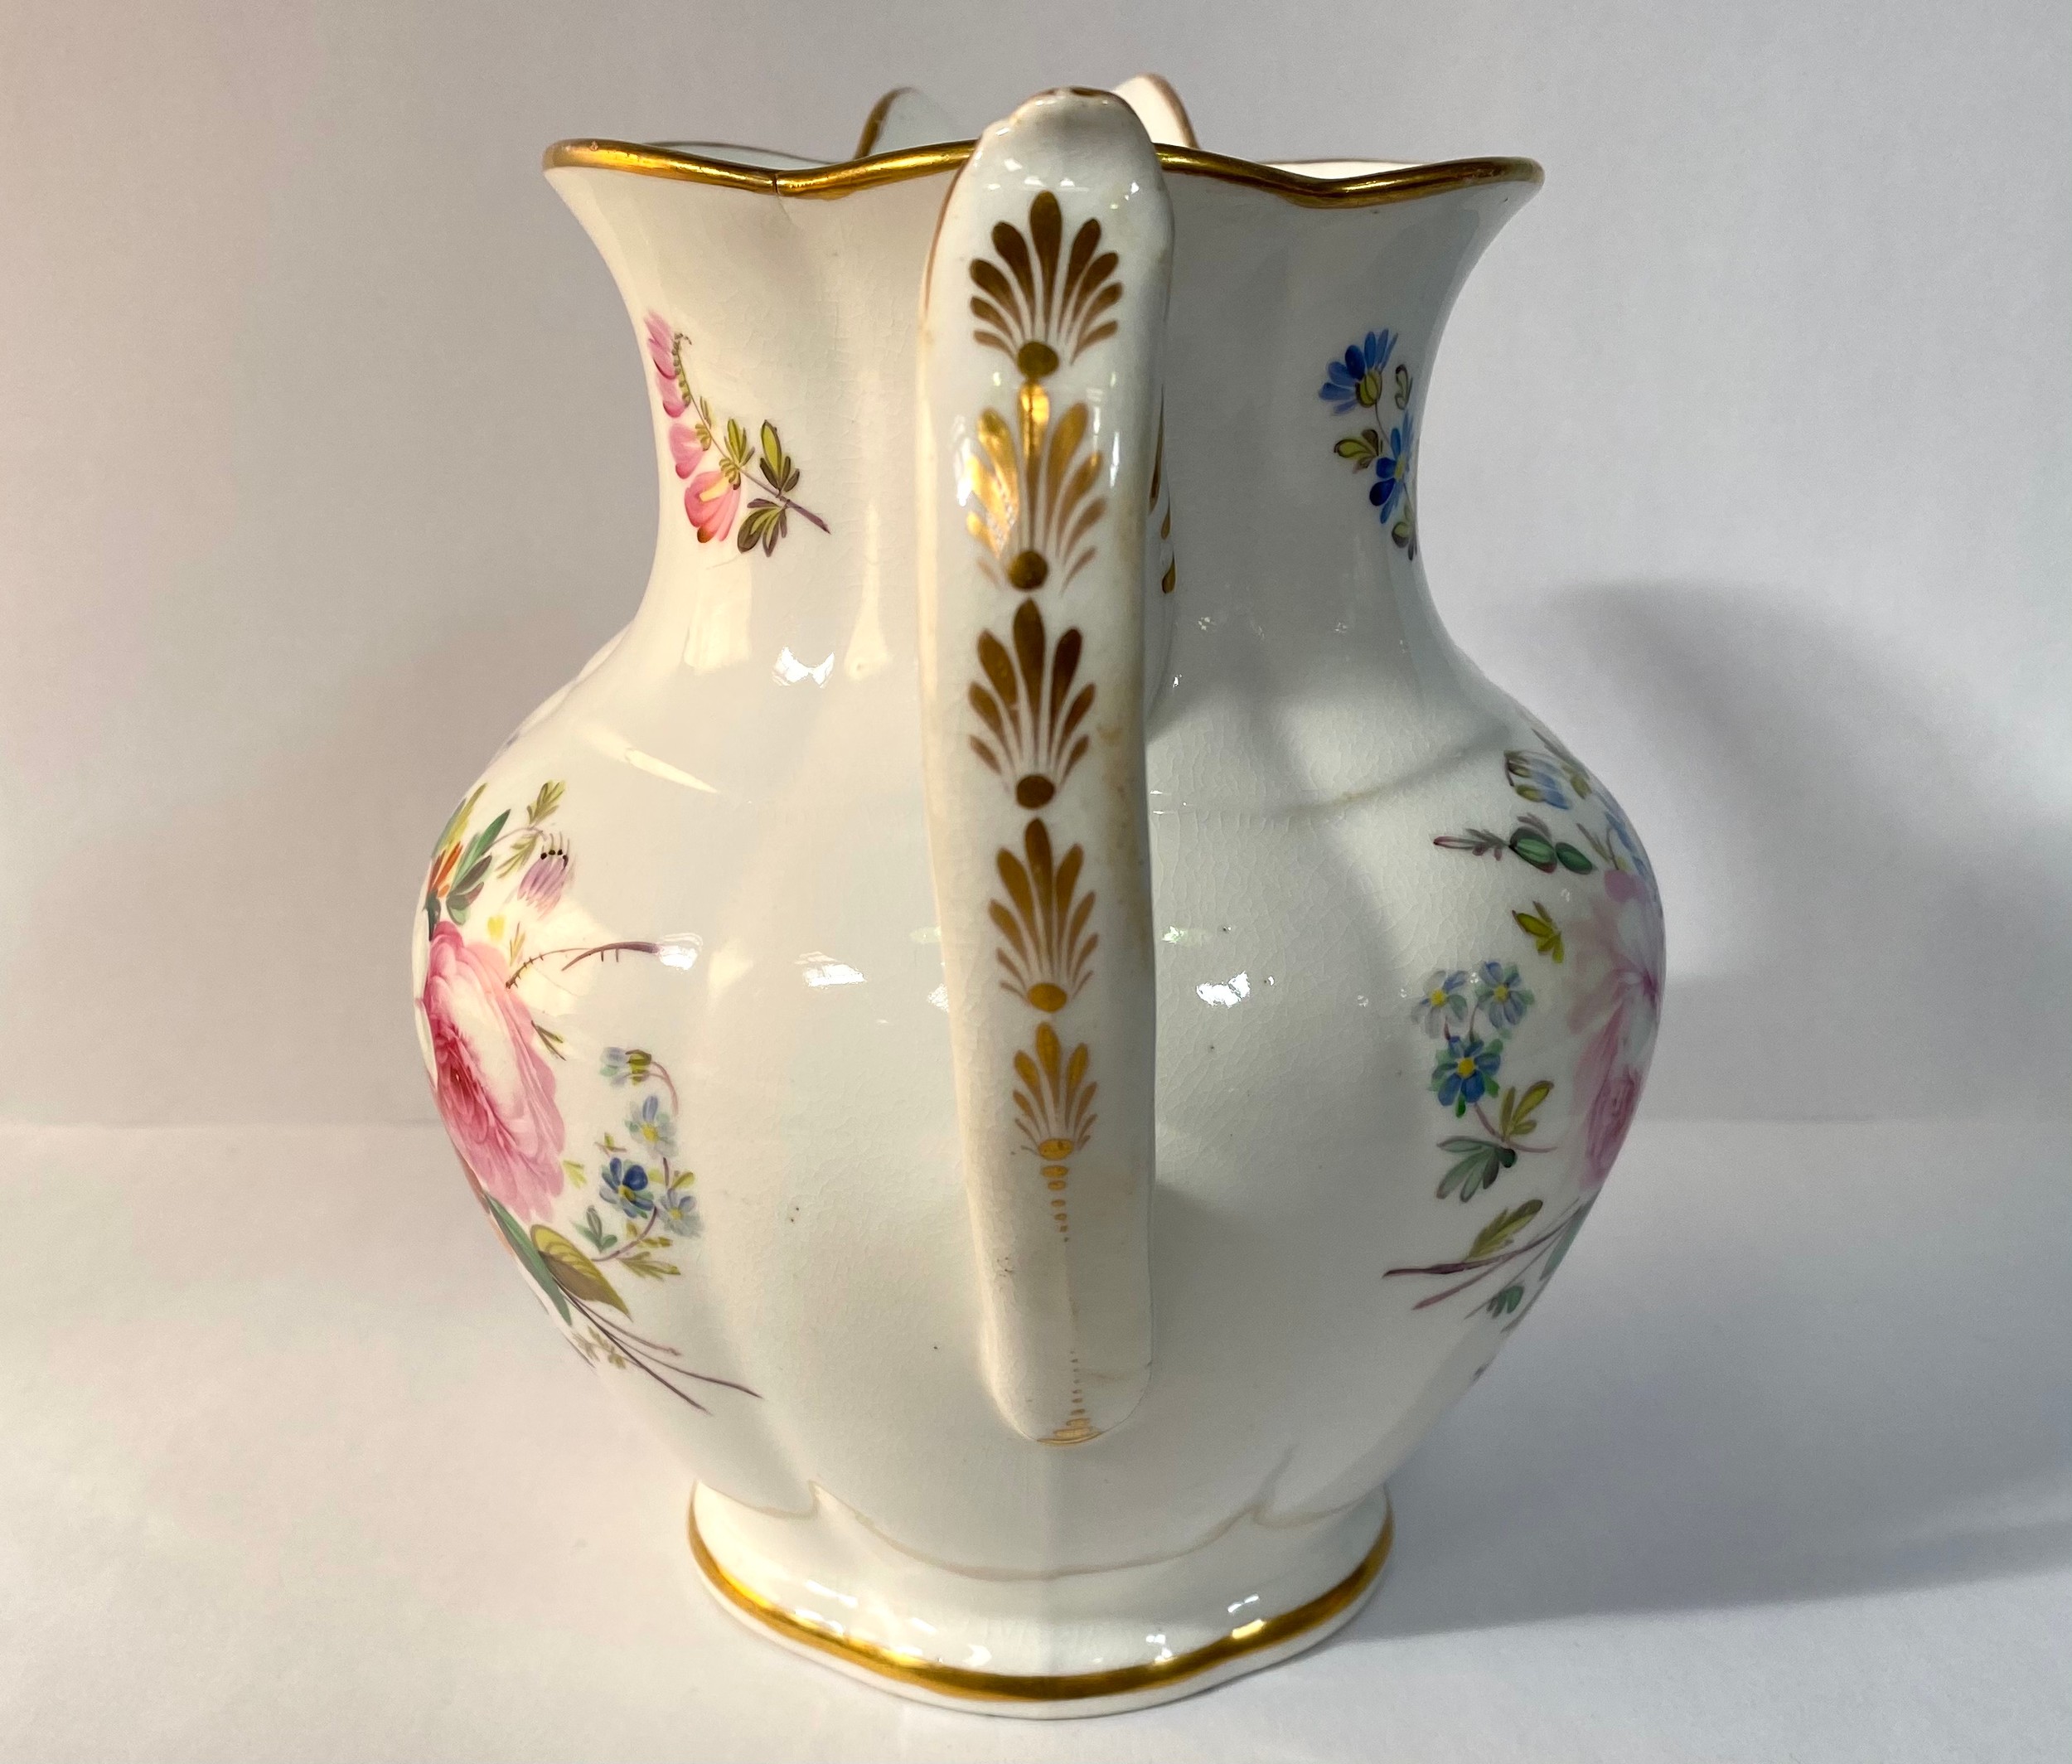 A 19th century porcelain jug, painted with flowers and with a gilt monogram 'VR', 19cm high, - Image 4 of 6